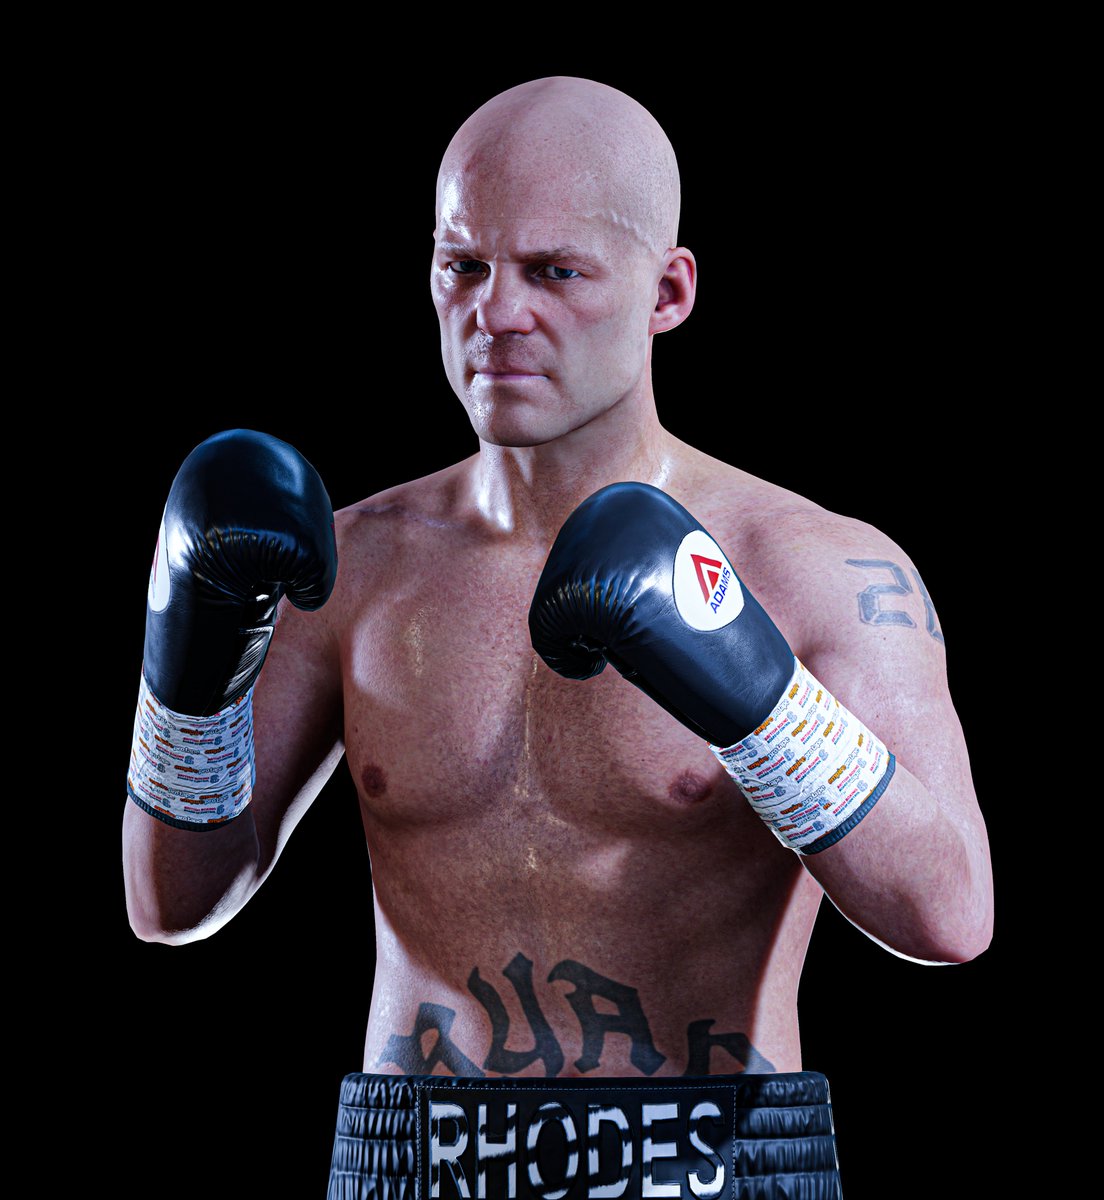 Sheffield's own Ryan Rhodes (@26RLR), former European super welterweight champion, will be available on day 1 of early access in Undisputed! #BecomeUndisputed 🥊